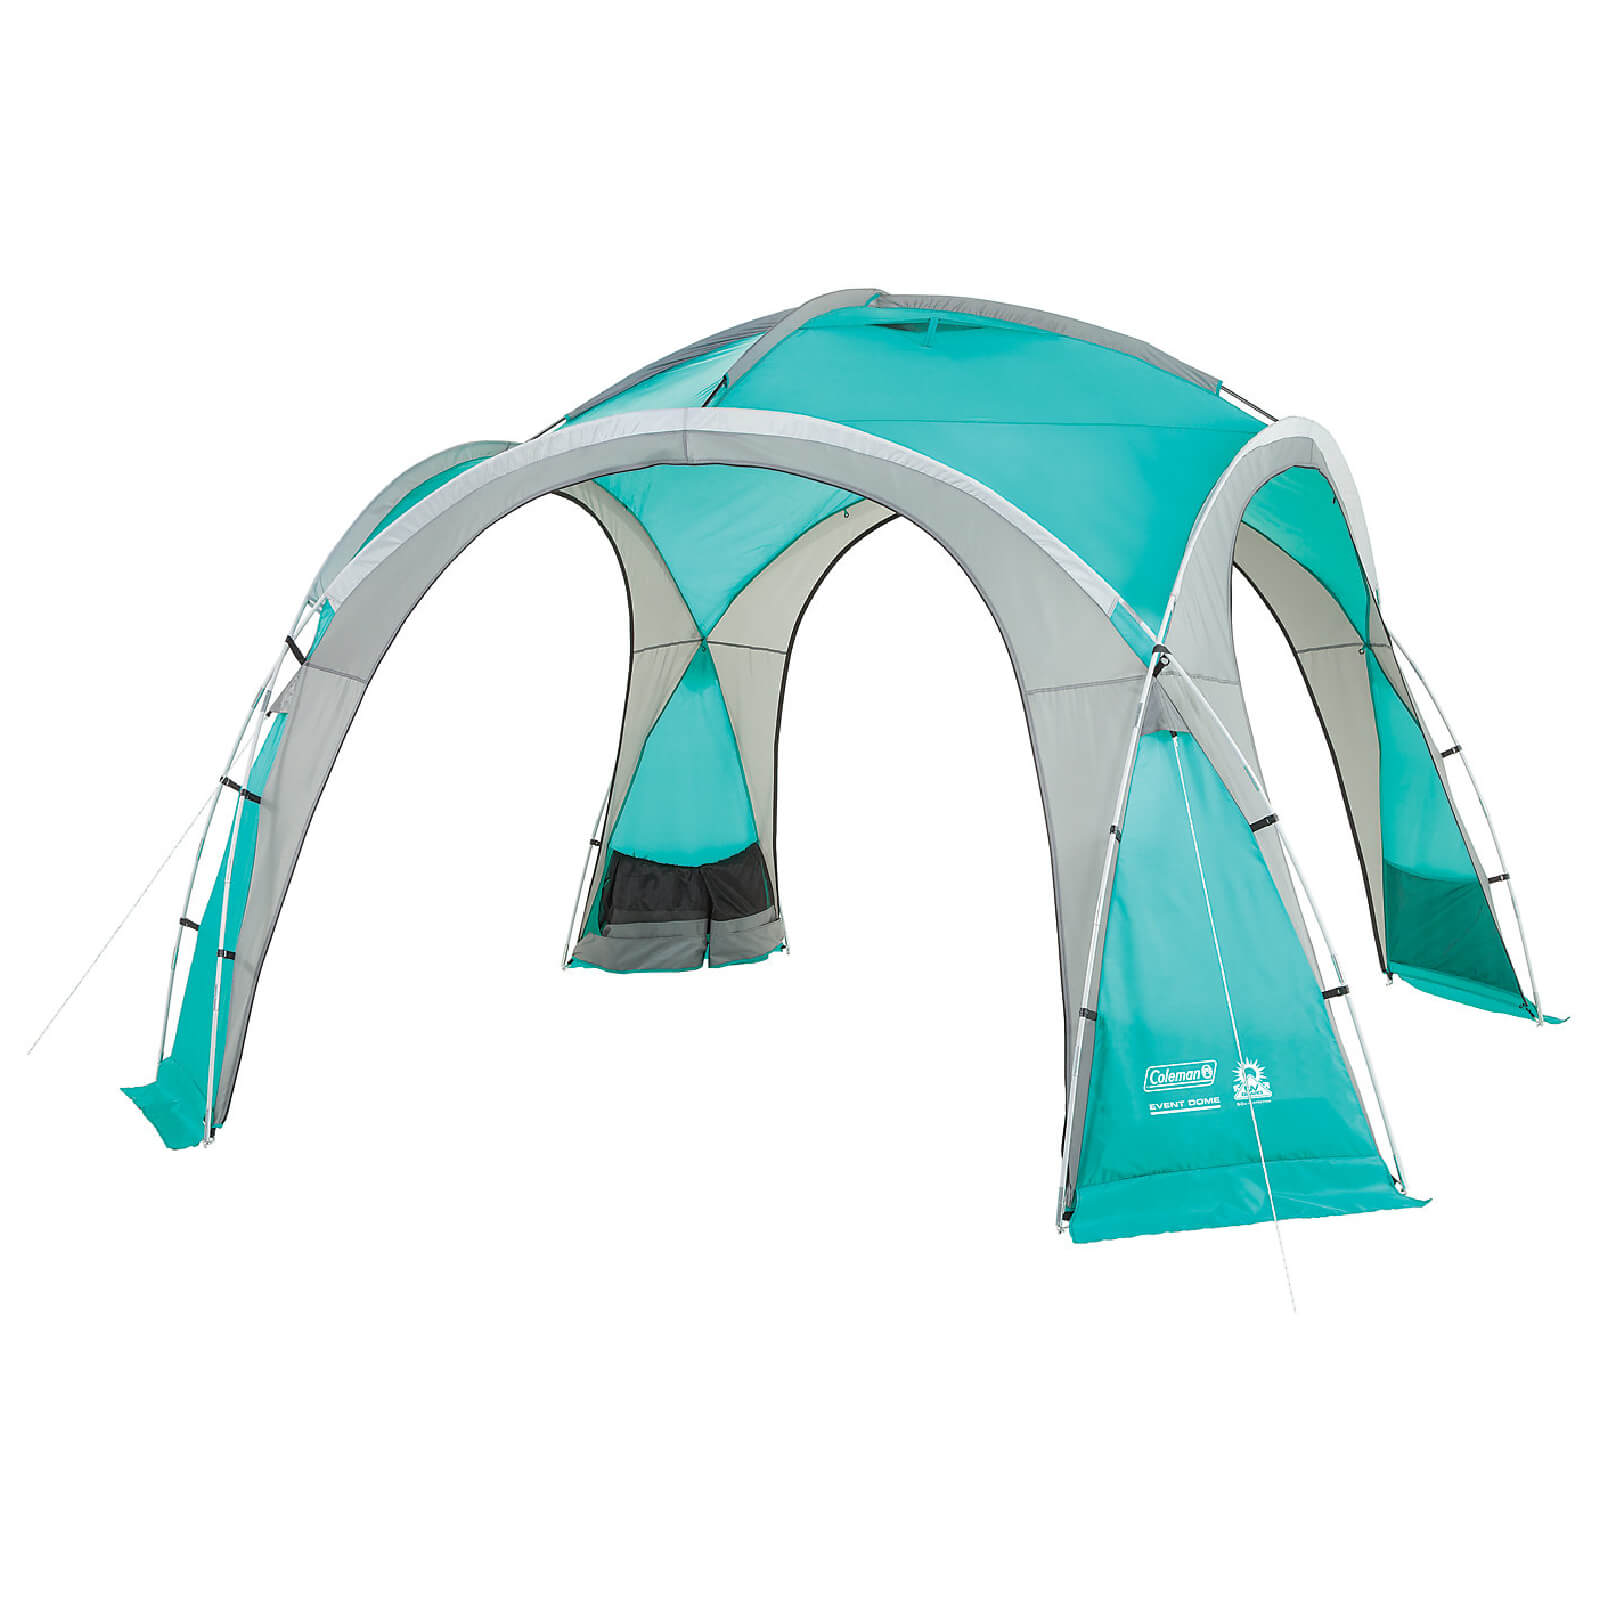 Event Shelter Coleman Event Dome With 4 Screen Walls & 2 Doors Large (3.65x3.65m)